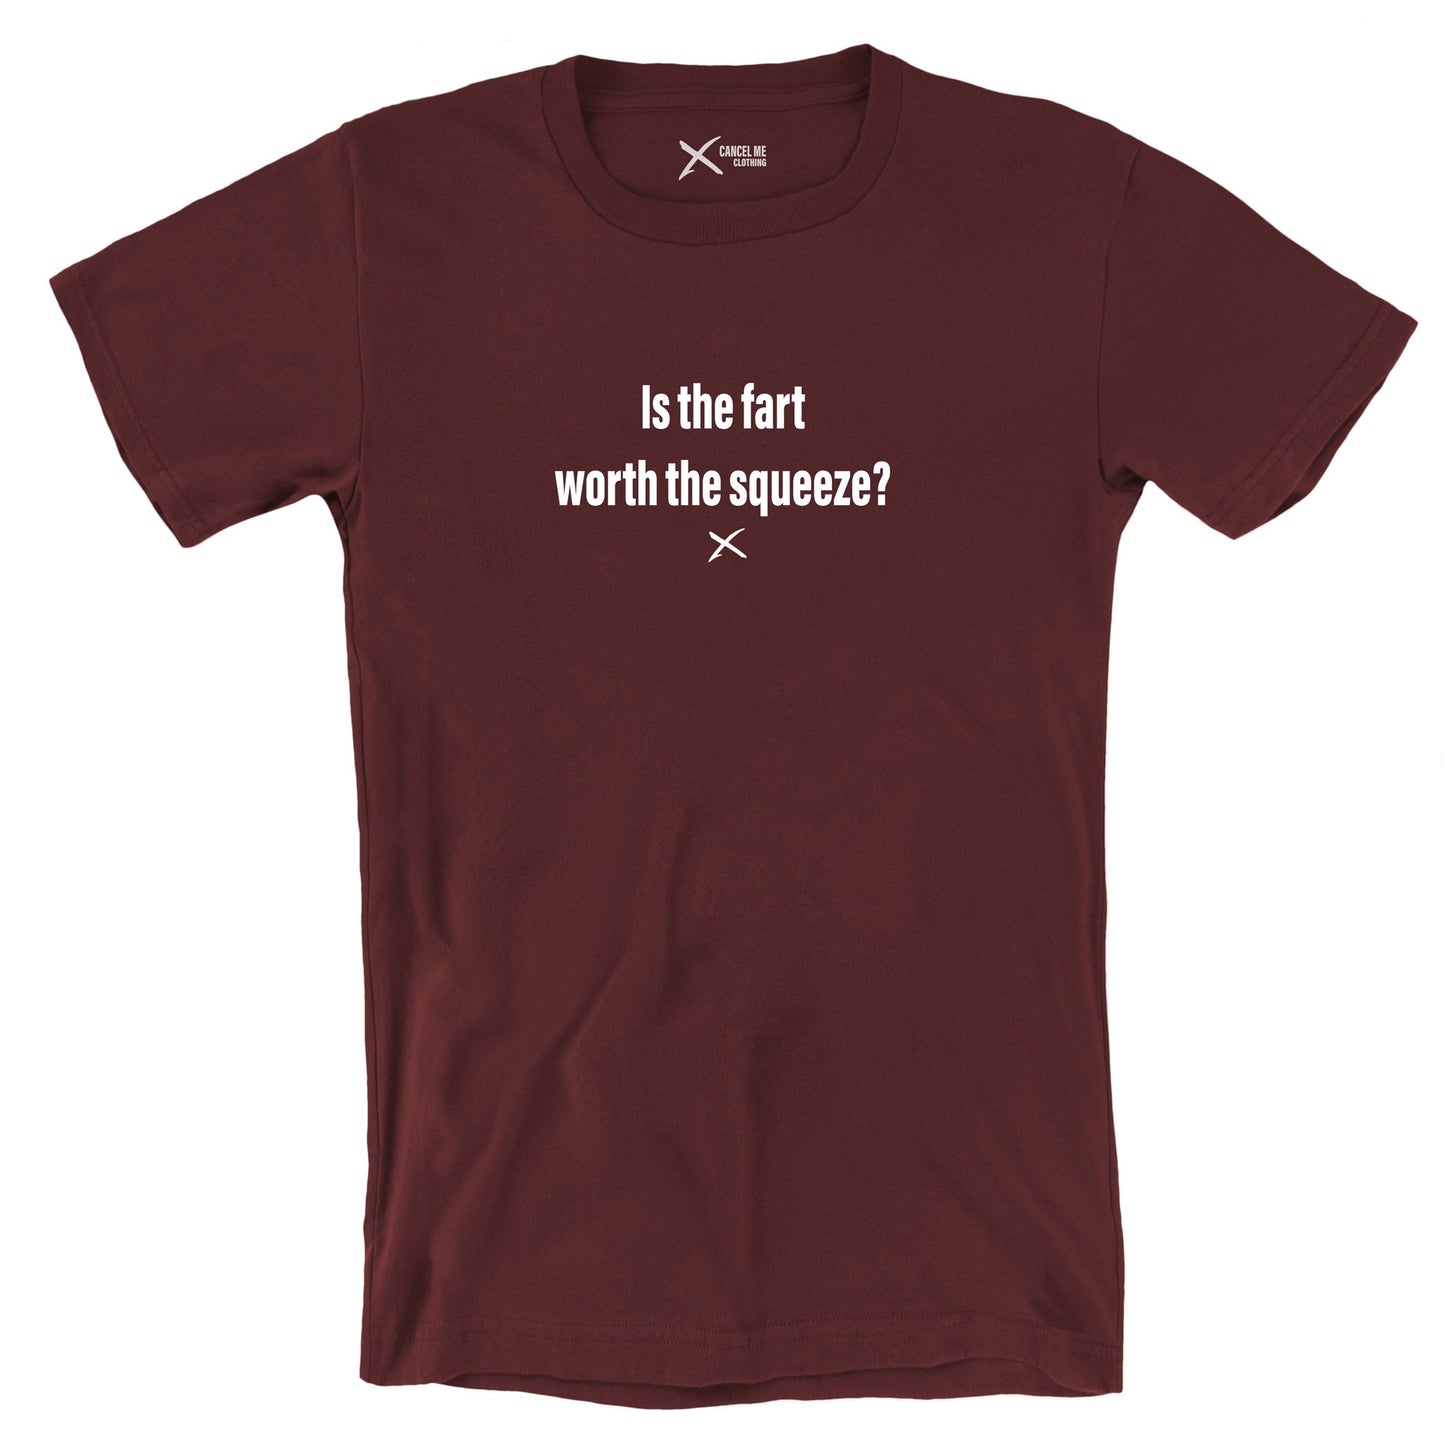 Is the fart worth the squeeze? - Shirt